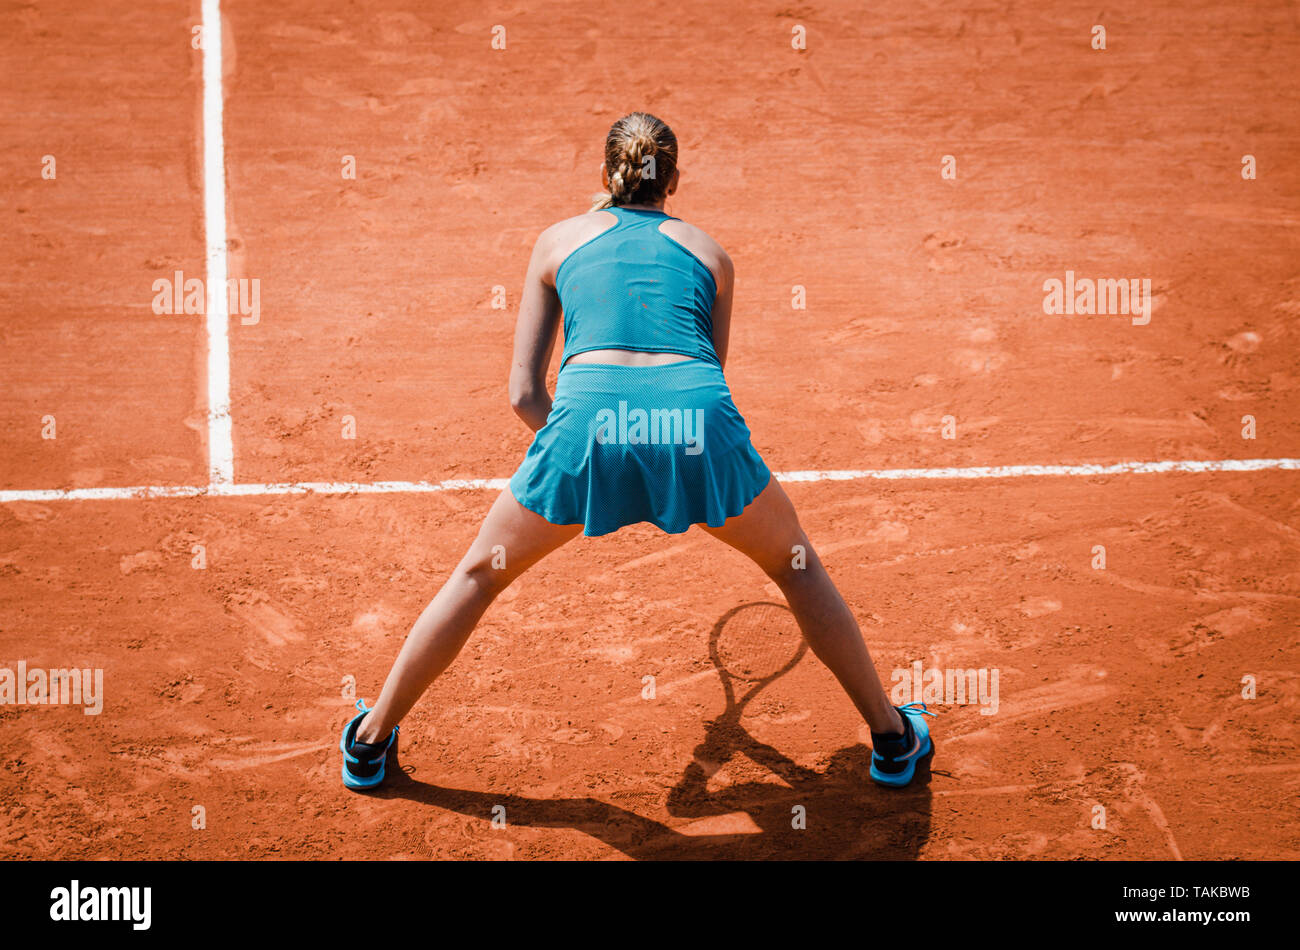 Back view  of a woman playing tennis, waiting to receive service,  outdoor competition game, running, professional Stock Photo